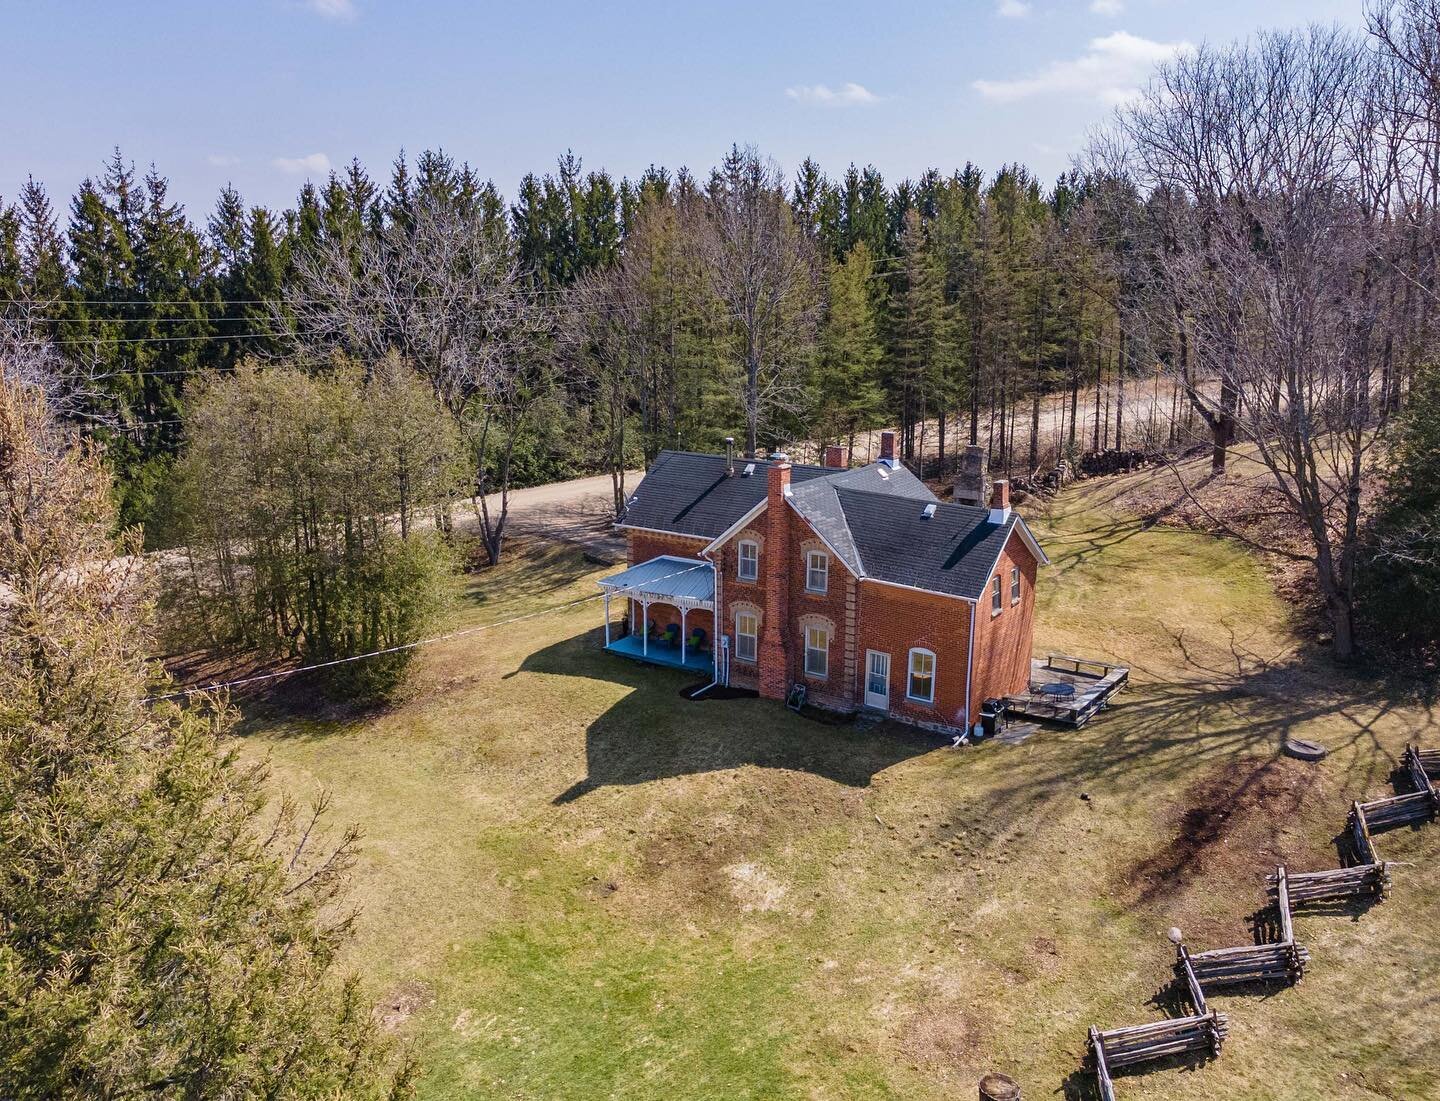 Exclusive listing ✨ 953136 7th Line EHS, Mono, ON 🌲🏡

A wonderful opportunity to own a piece of Mono Township's history. This special property was built in 1891 and remarkably has only been in two families since that time. Sitting on 29 acres of ro